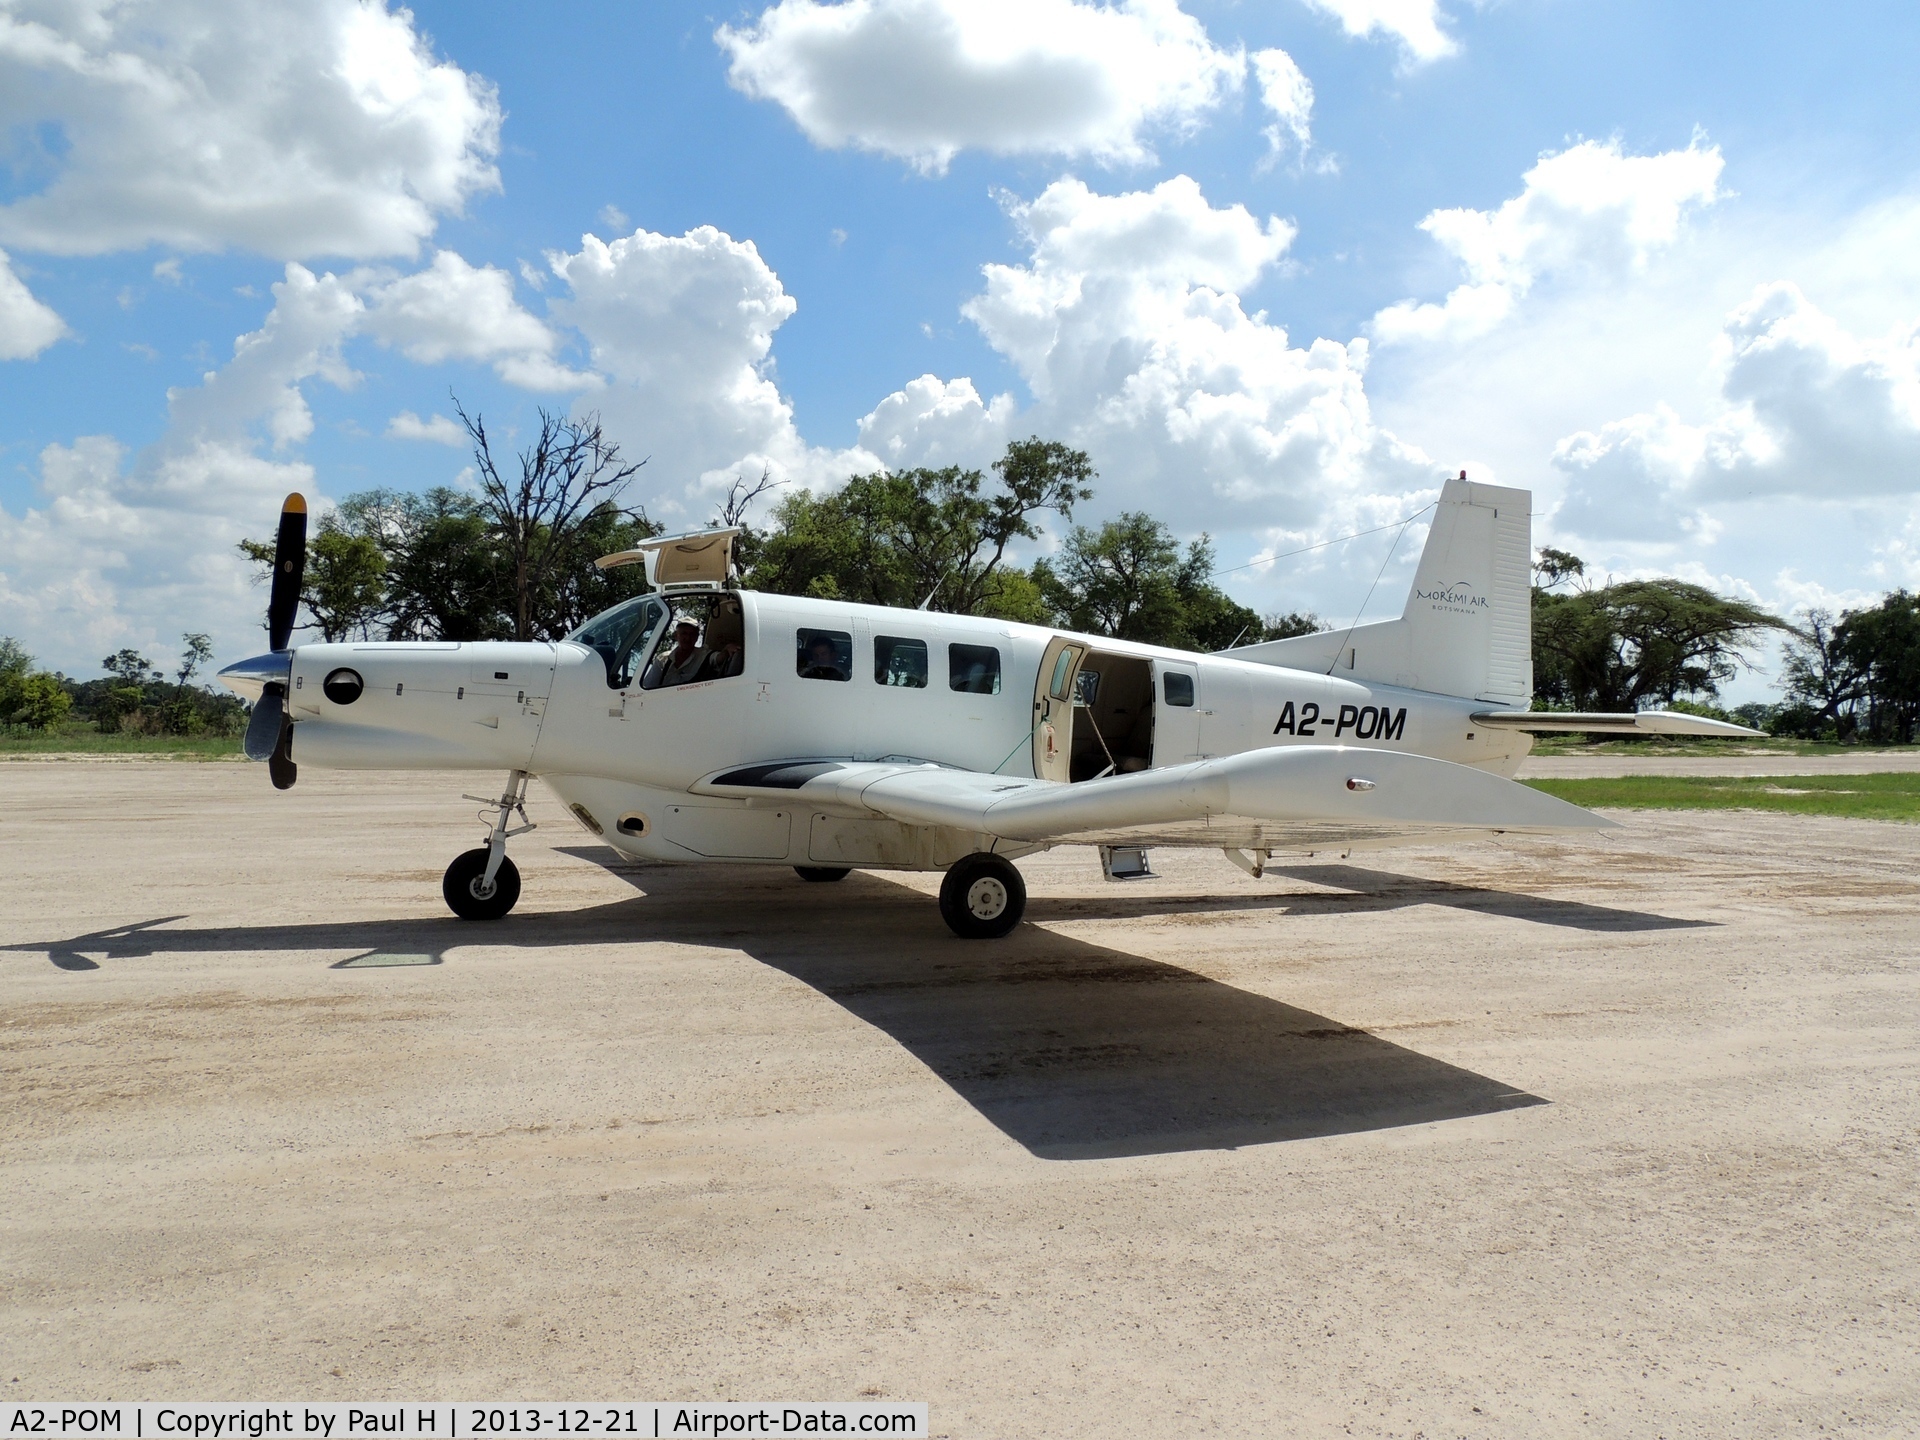 A2-POM, Pacific Aerospace 750XL C/N 131, At the Airstrip of Gunns Camp in Botswana